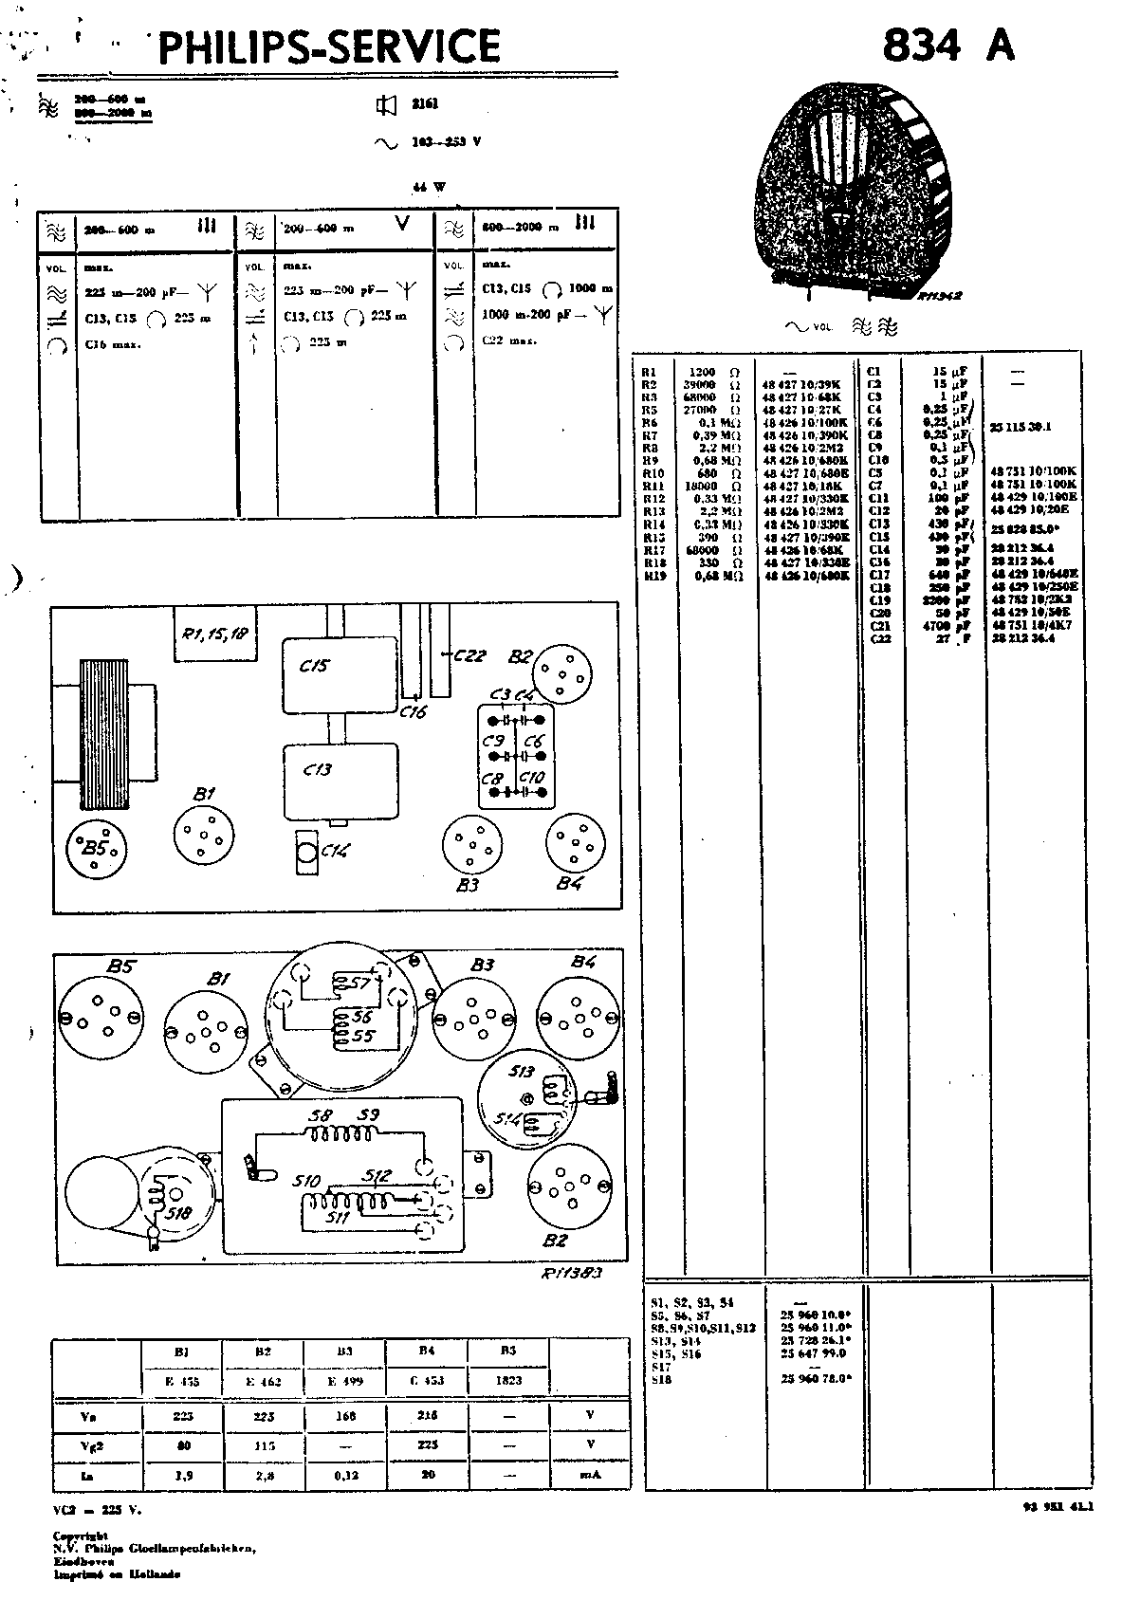 Philips 834-A, 824-A Service Manual